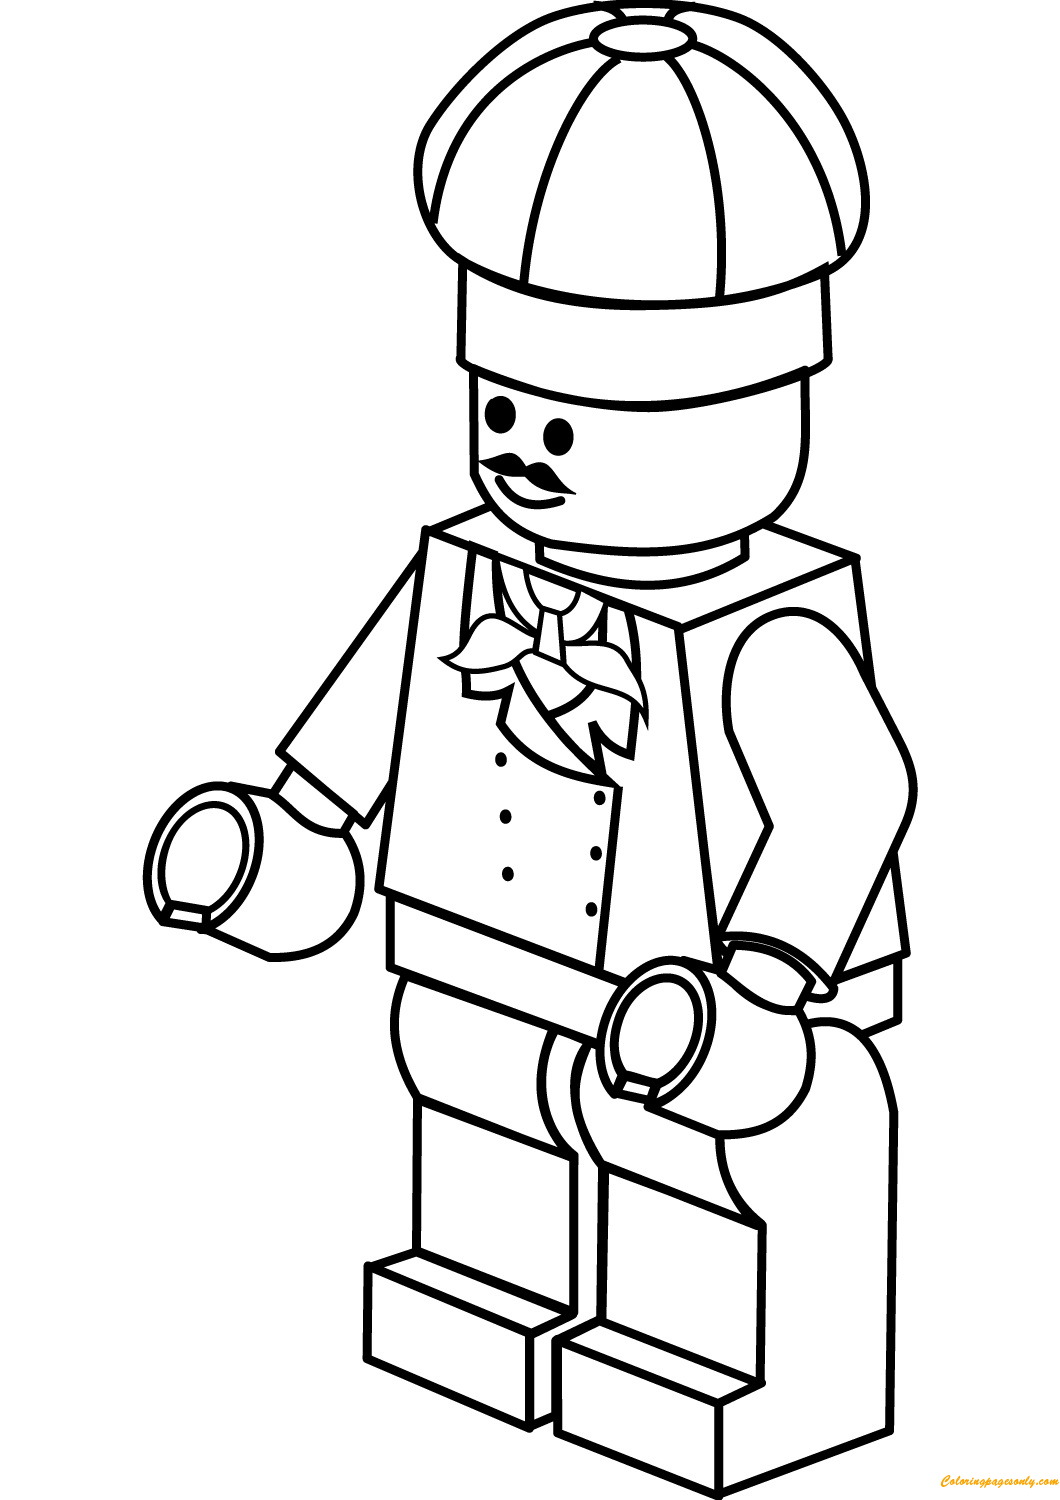 Lego City Chef Coloring Page - Free Coloring Pages Online